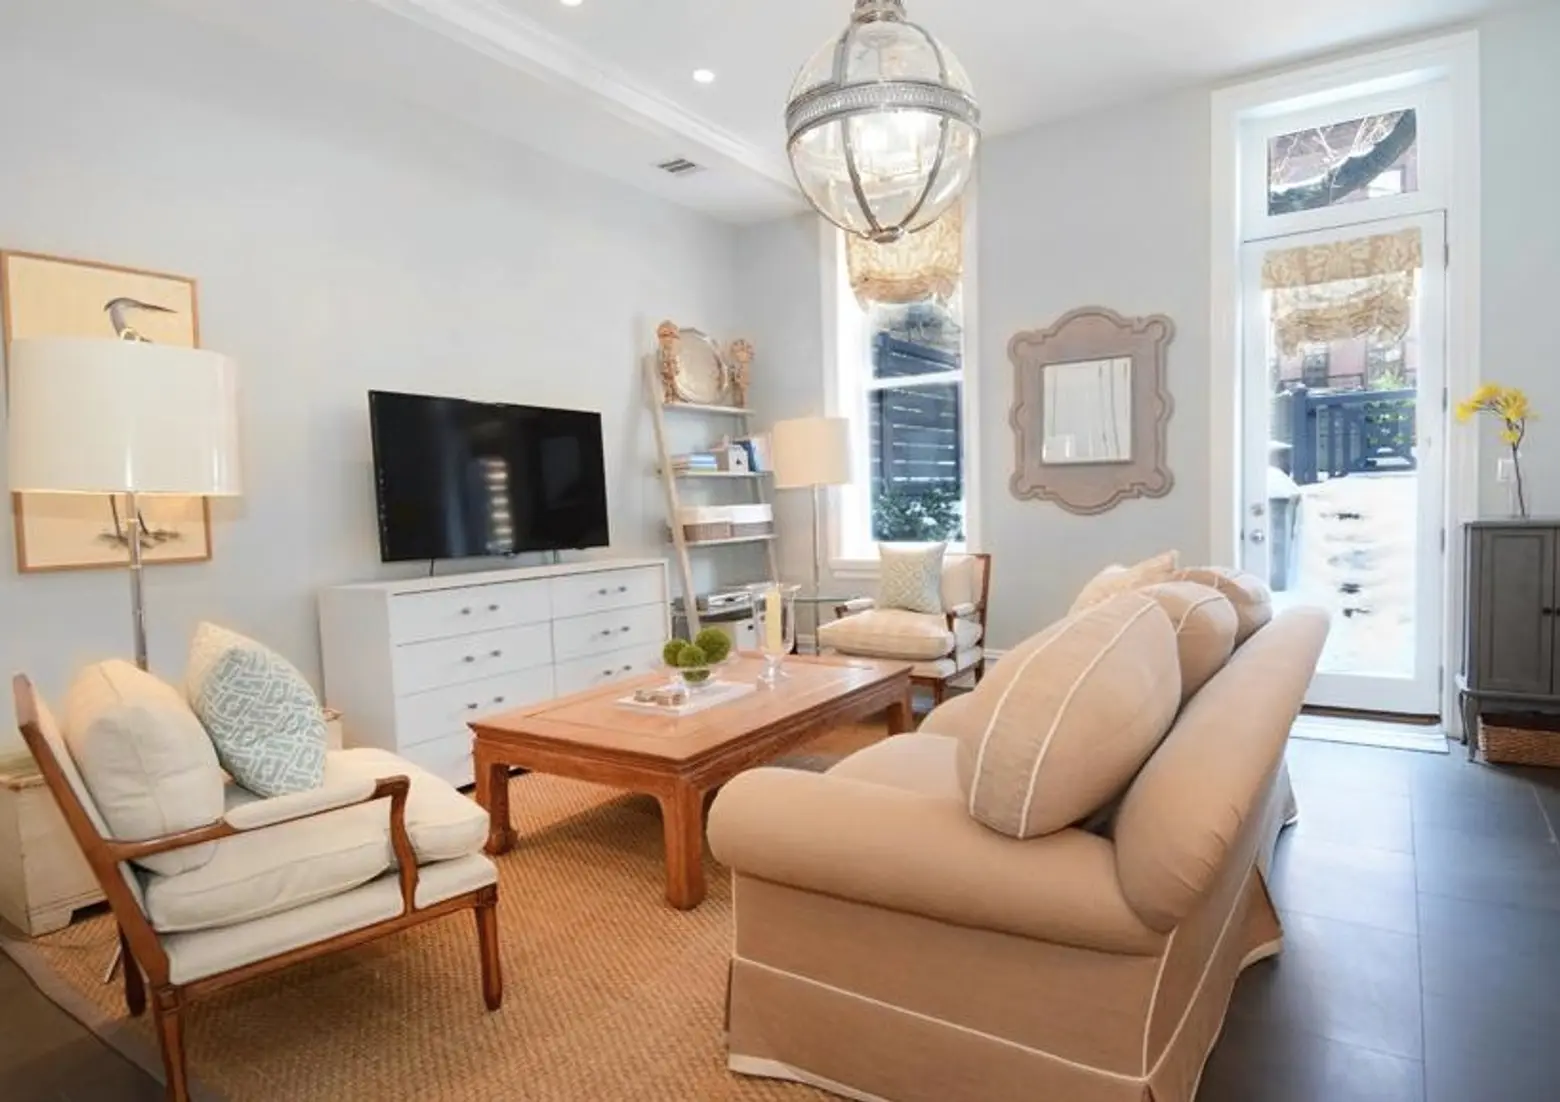 $2.3M Carriage House in Clinton Hill Blends the 19th Century with the 21st